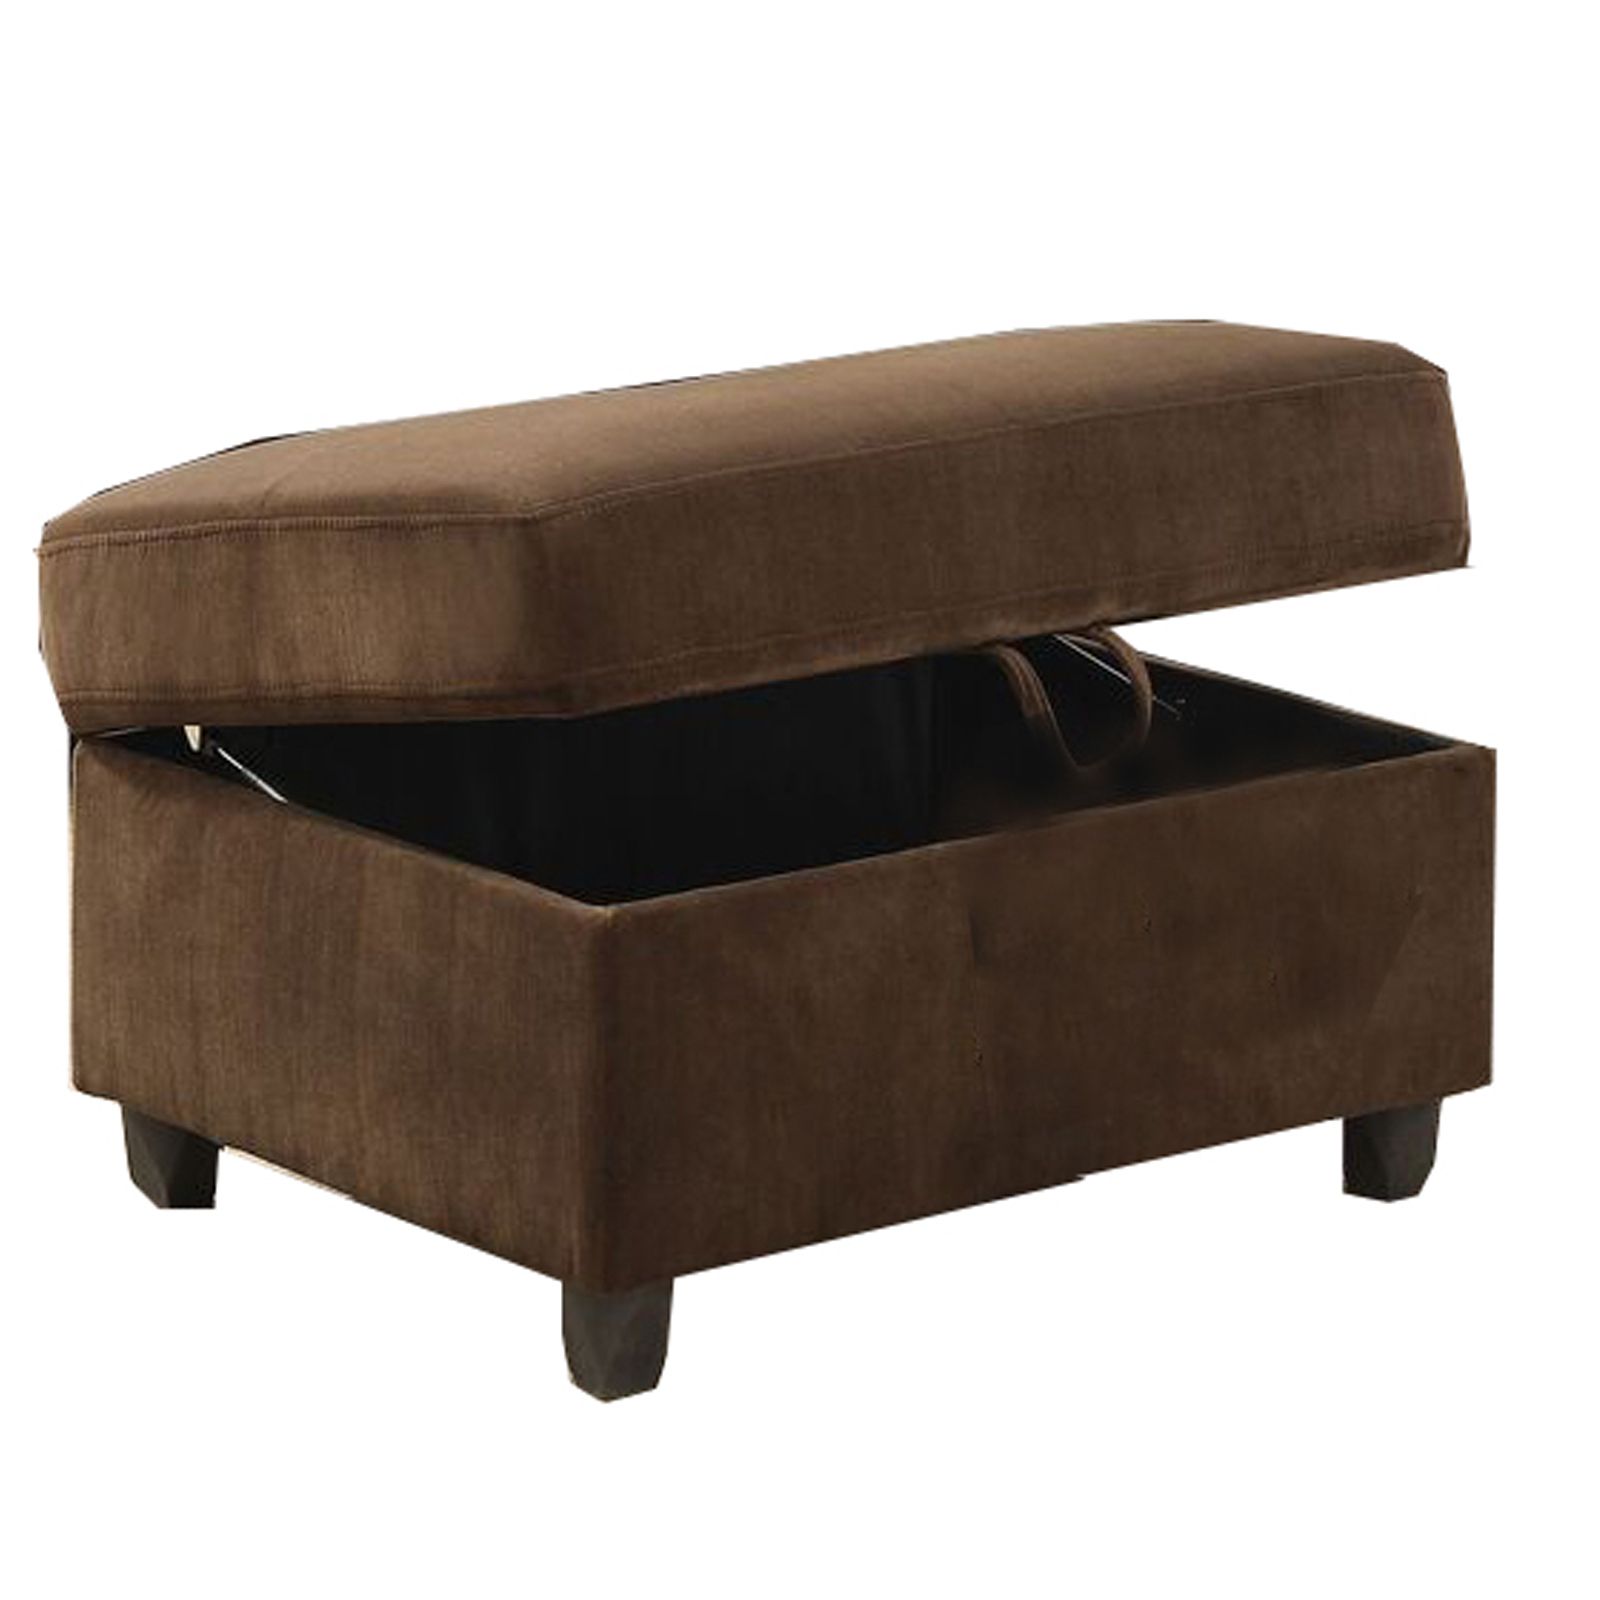 Fabric Upholstered Rectangular Ottoman With Hidden Storage, Brown Regarding Dark Blue Fabric Banded Ottomans (View 12 of 20)